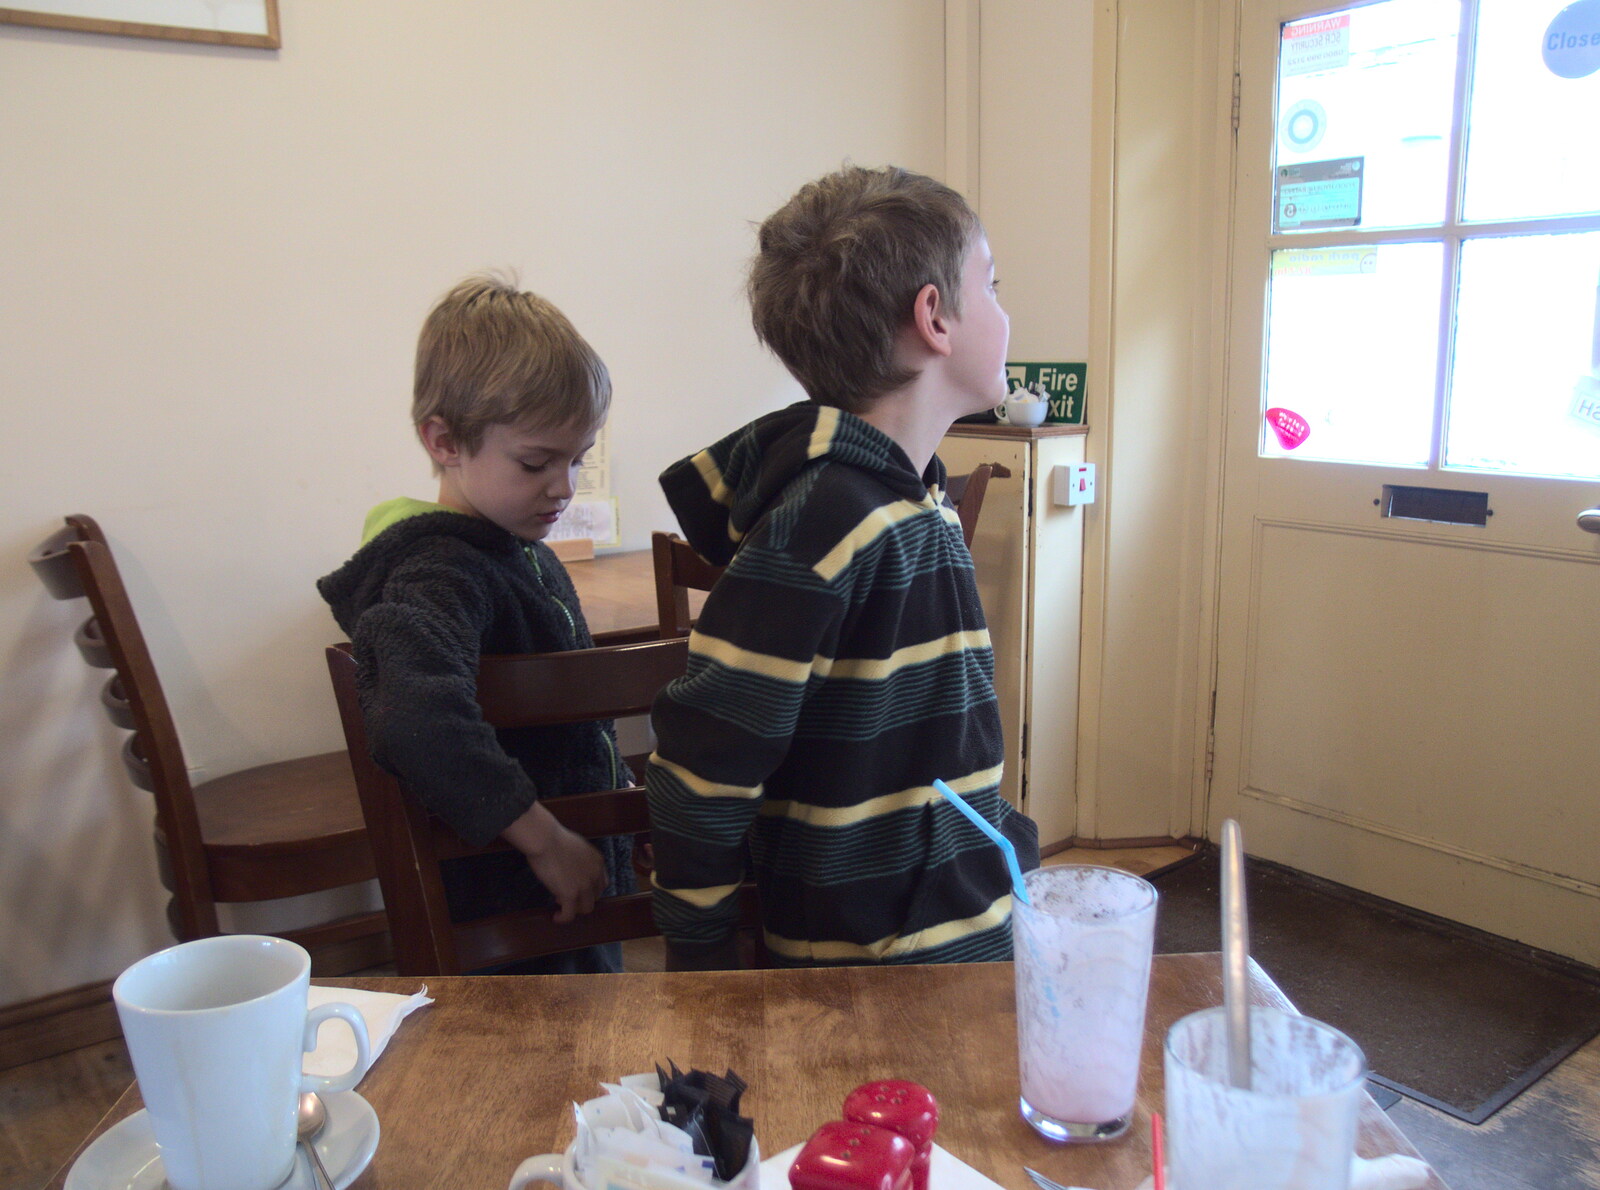 Harry and Fred in Mere Moments Café from Paddington Fire Alarms and Mere Moments Café, Diss, Norfolk - 2nd February 2018